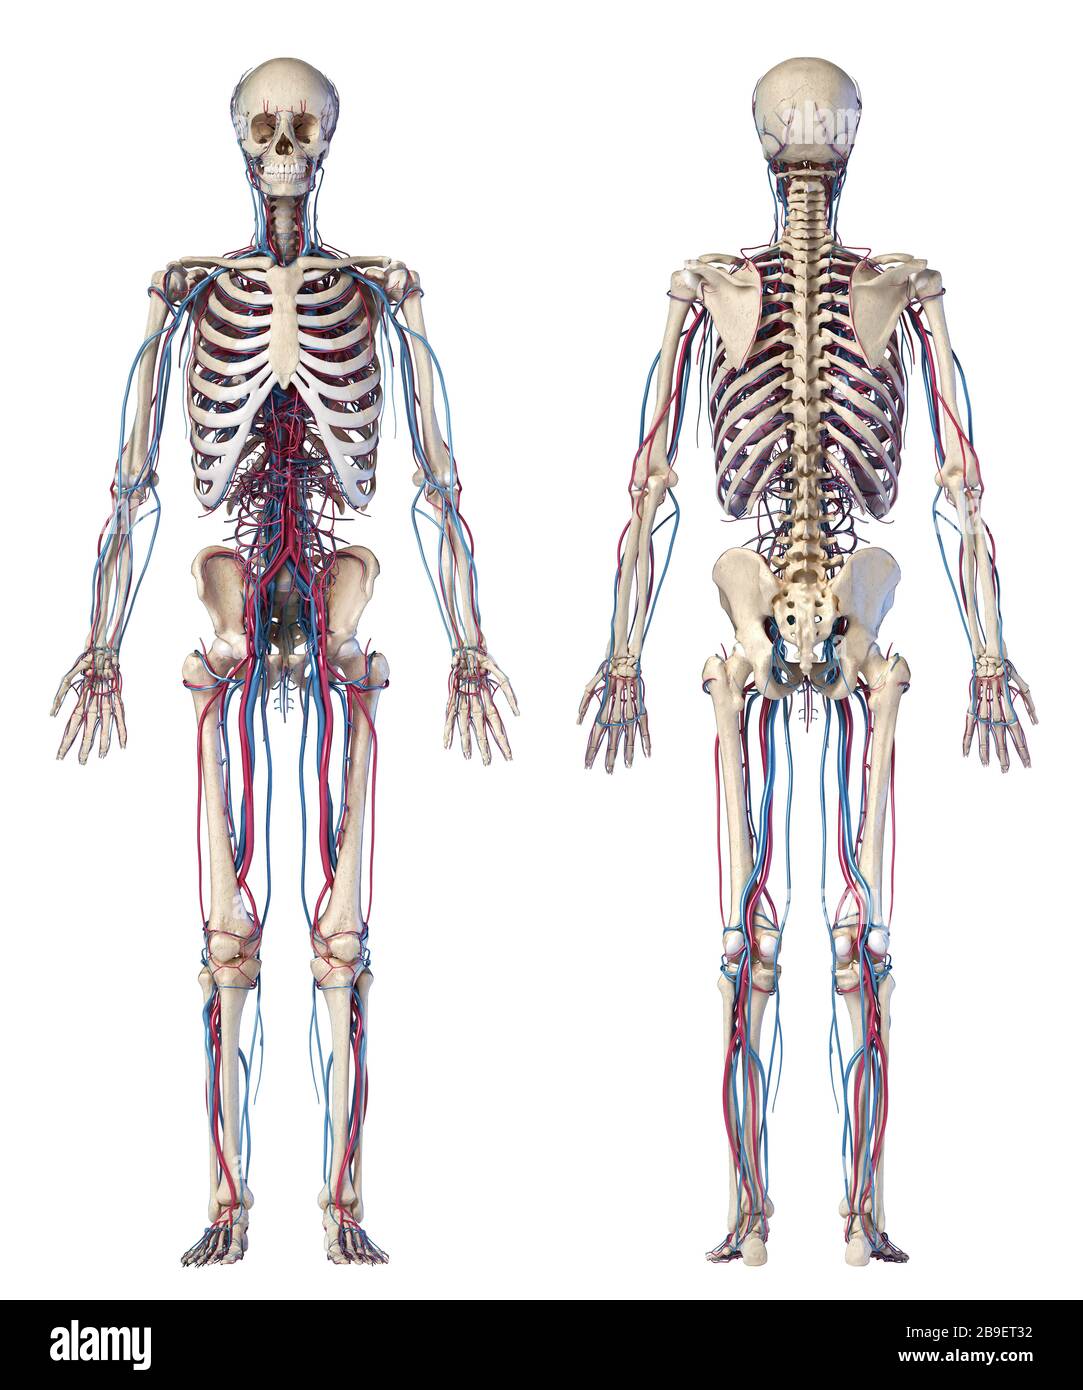 Anatomy of human skeleton with veins and arteries, on white background. Stock Photo